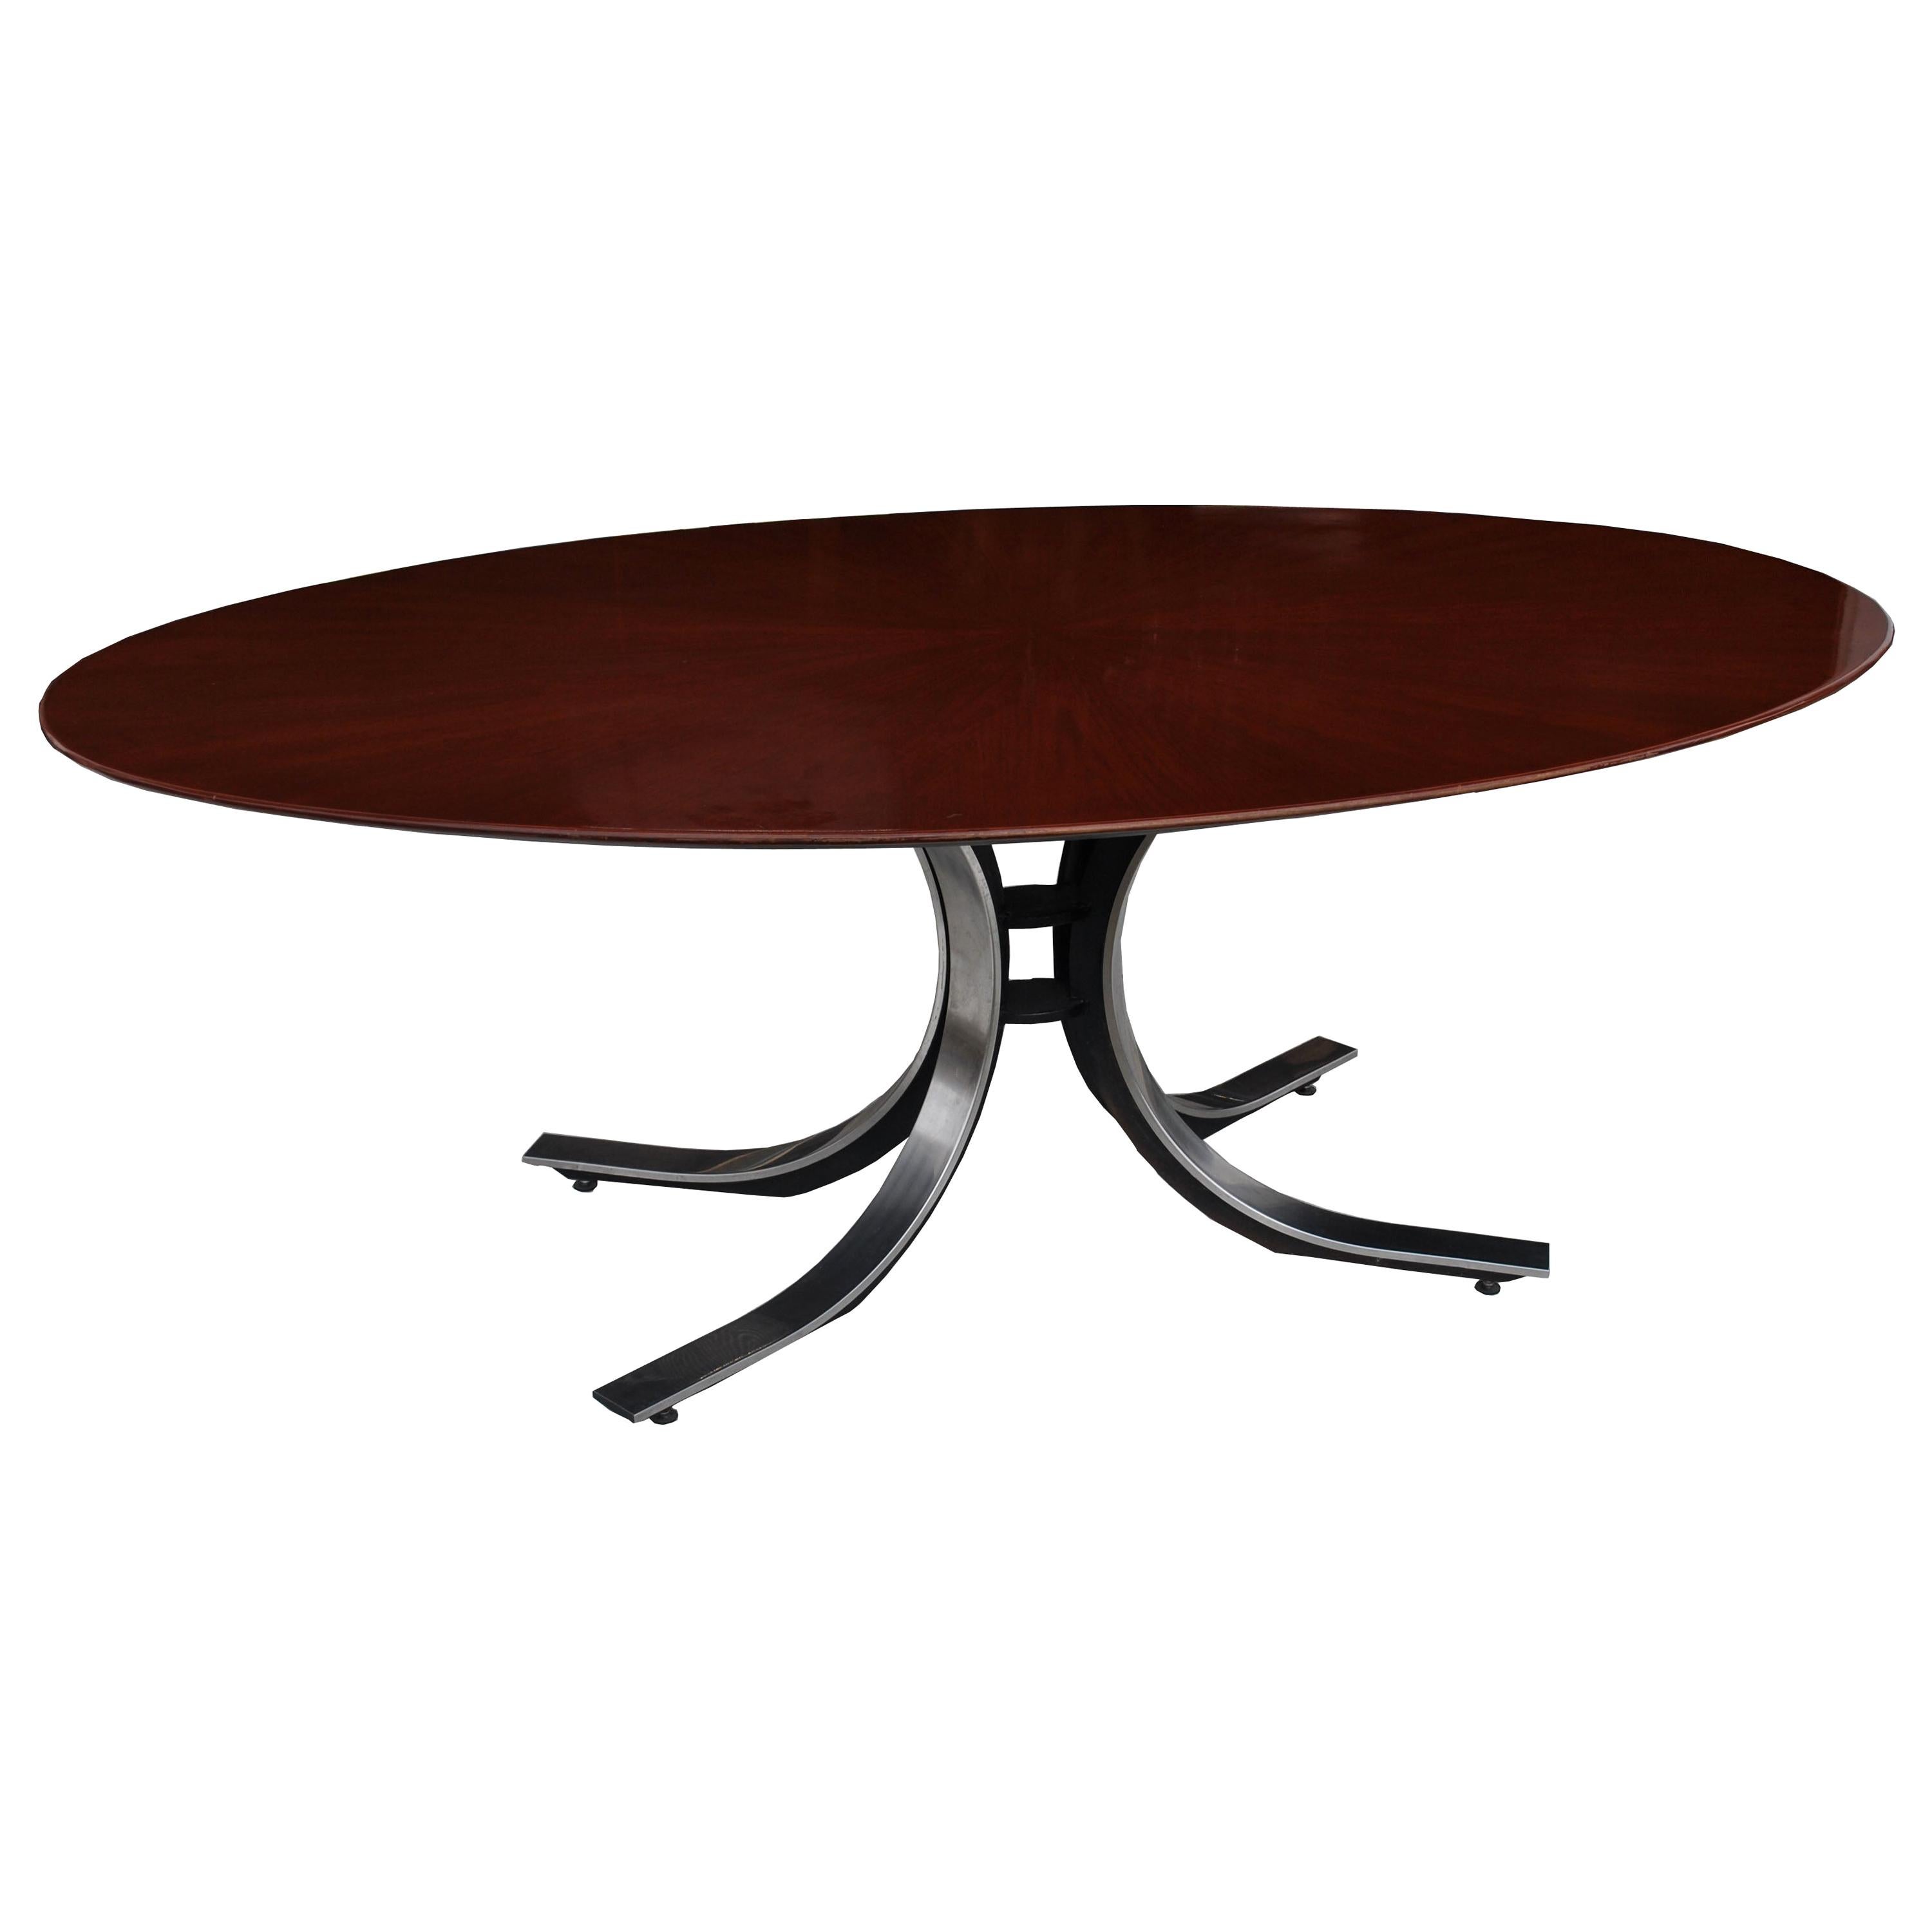 6FT Borsani Stow Davis Oval Dining Conference Table